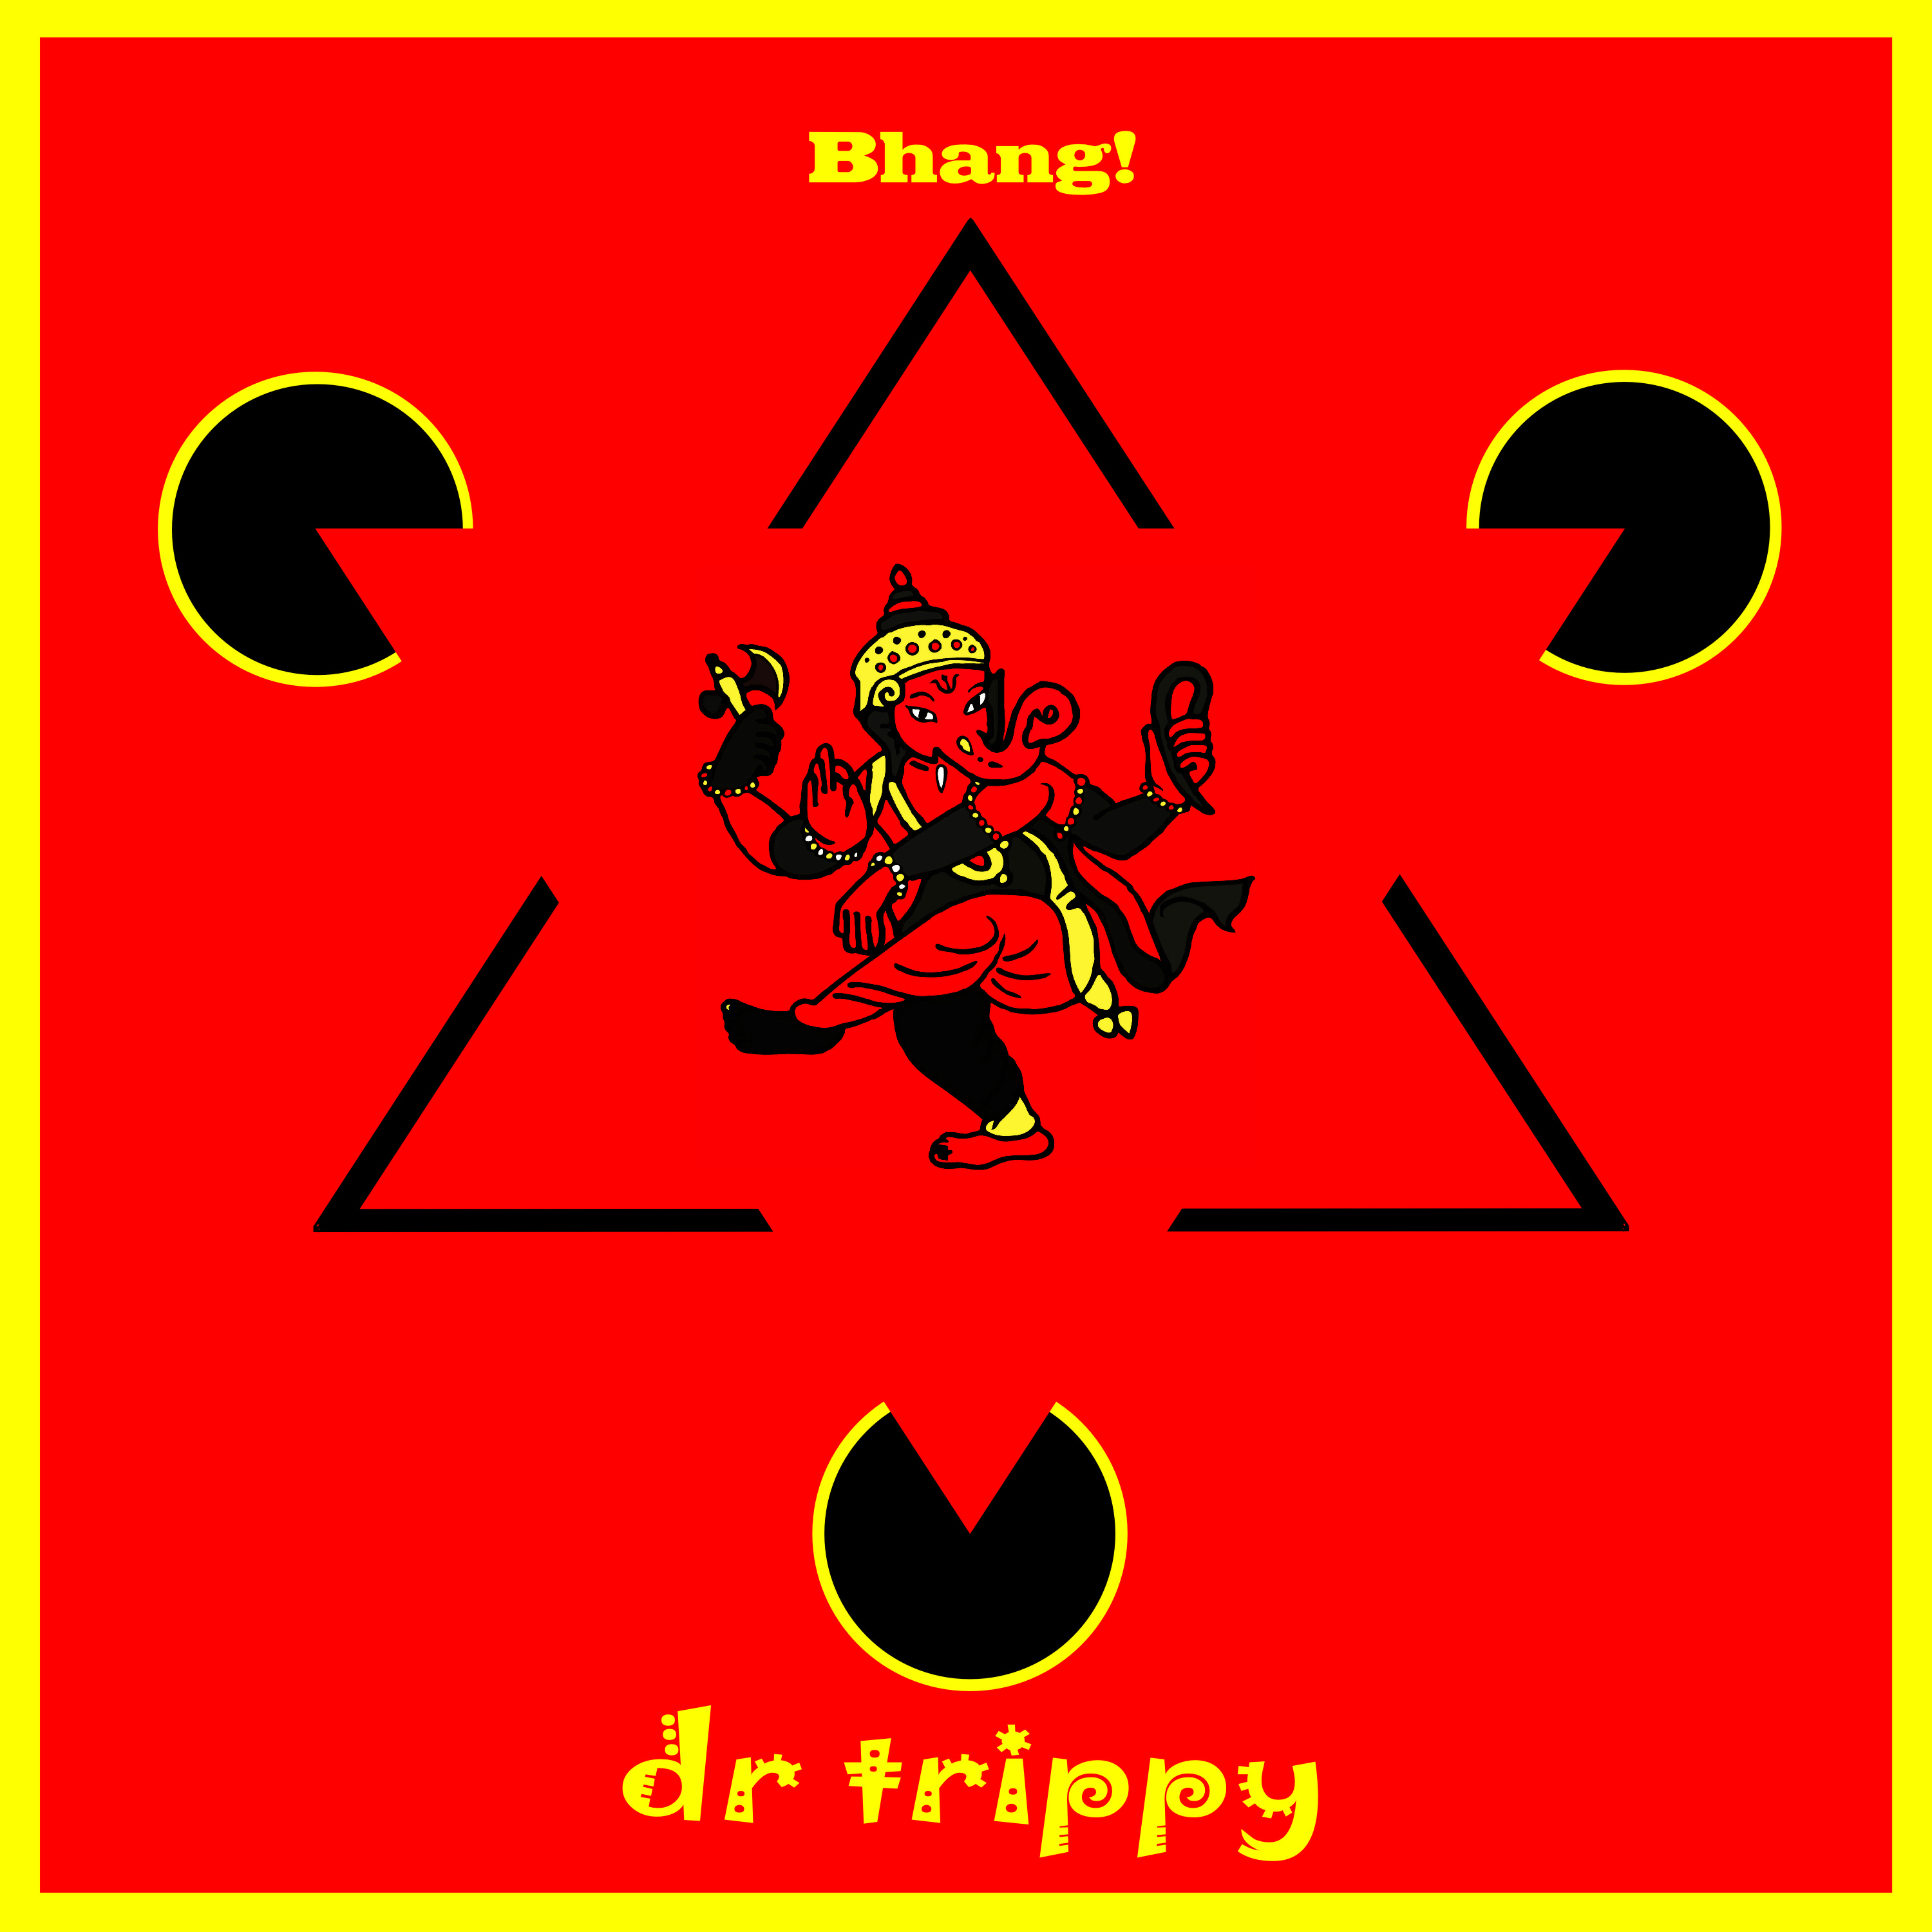 Dr. Trippy – Bhang!